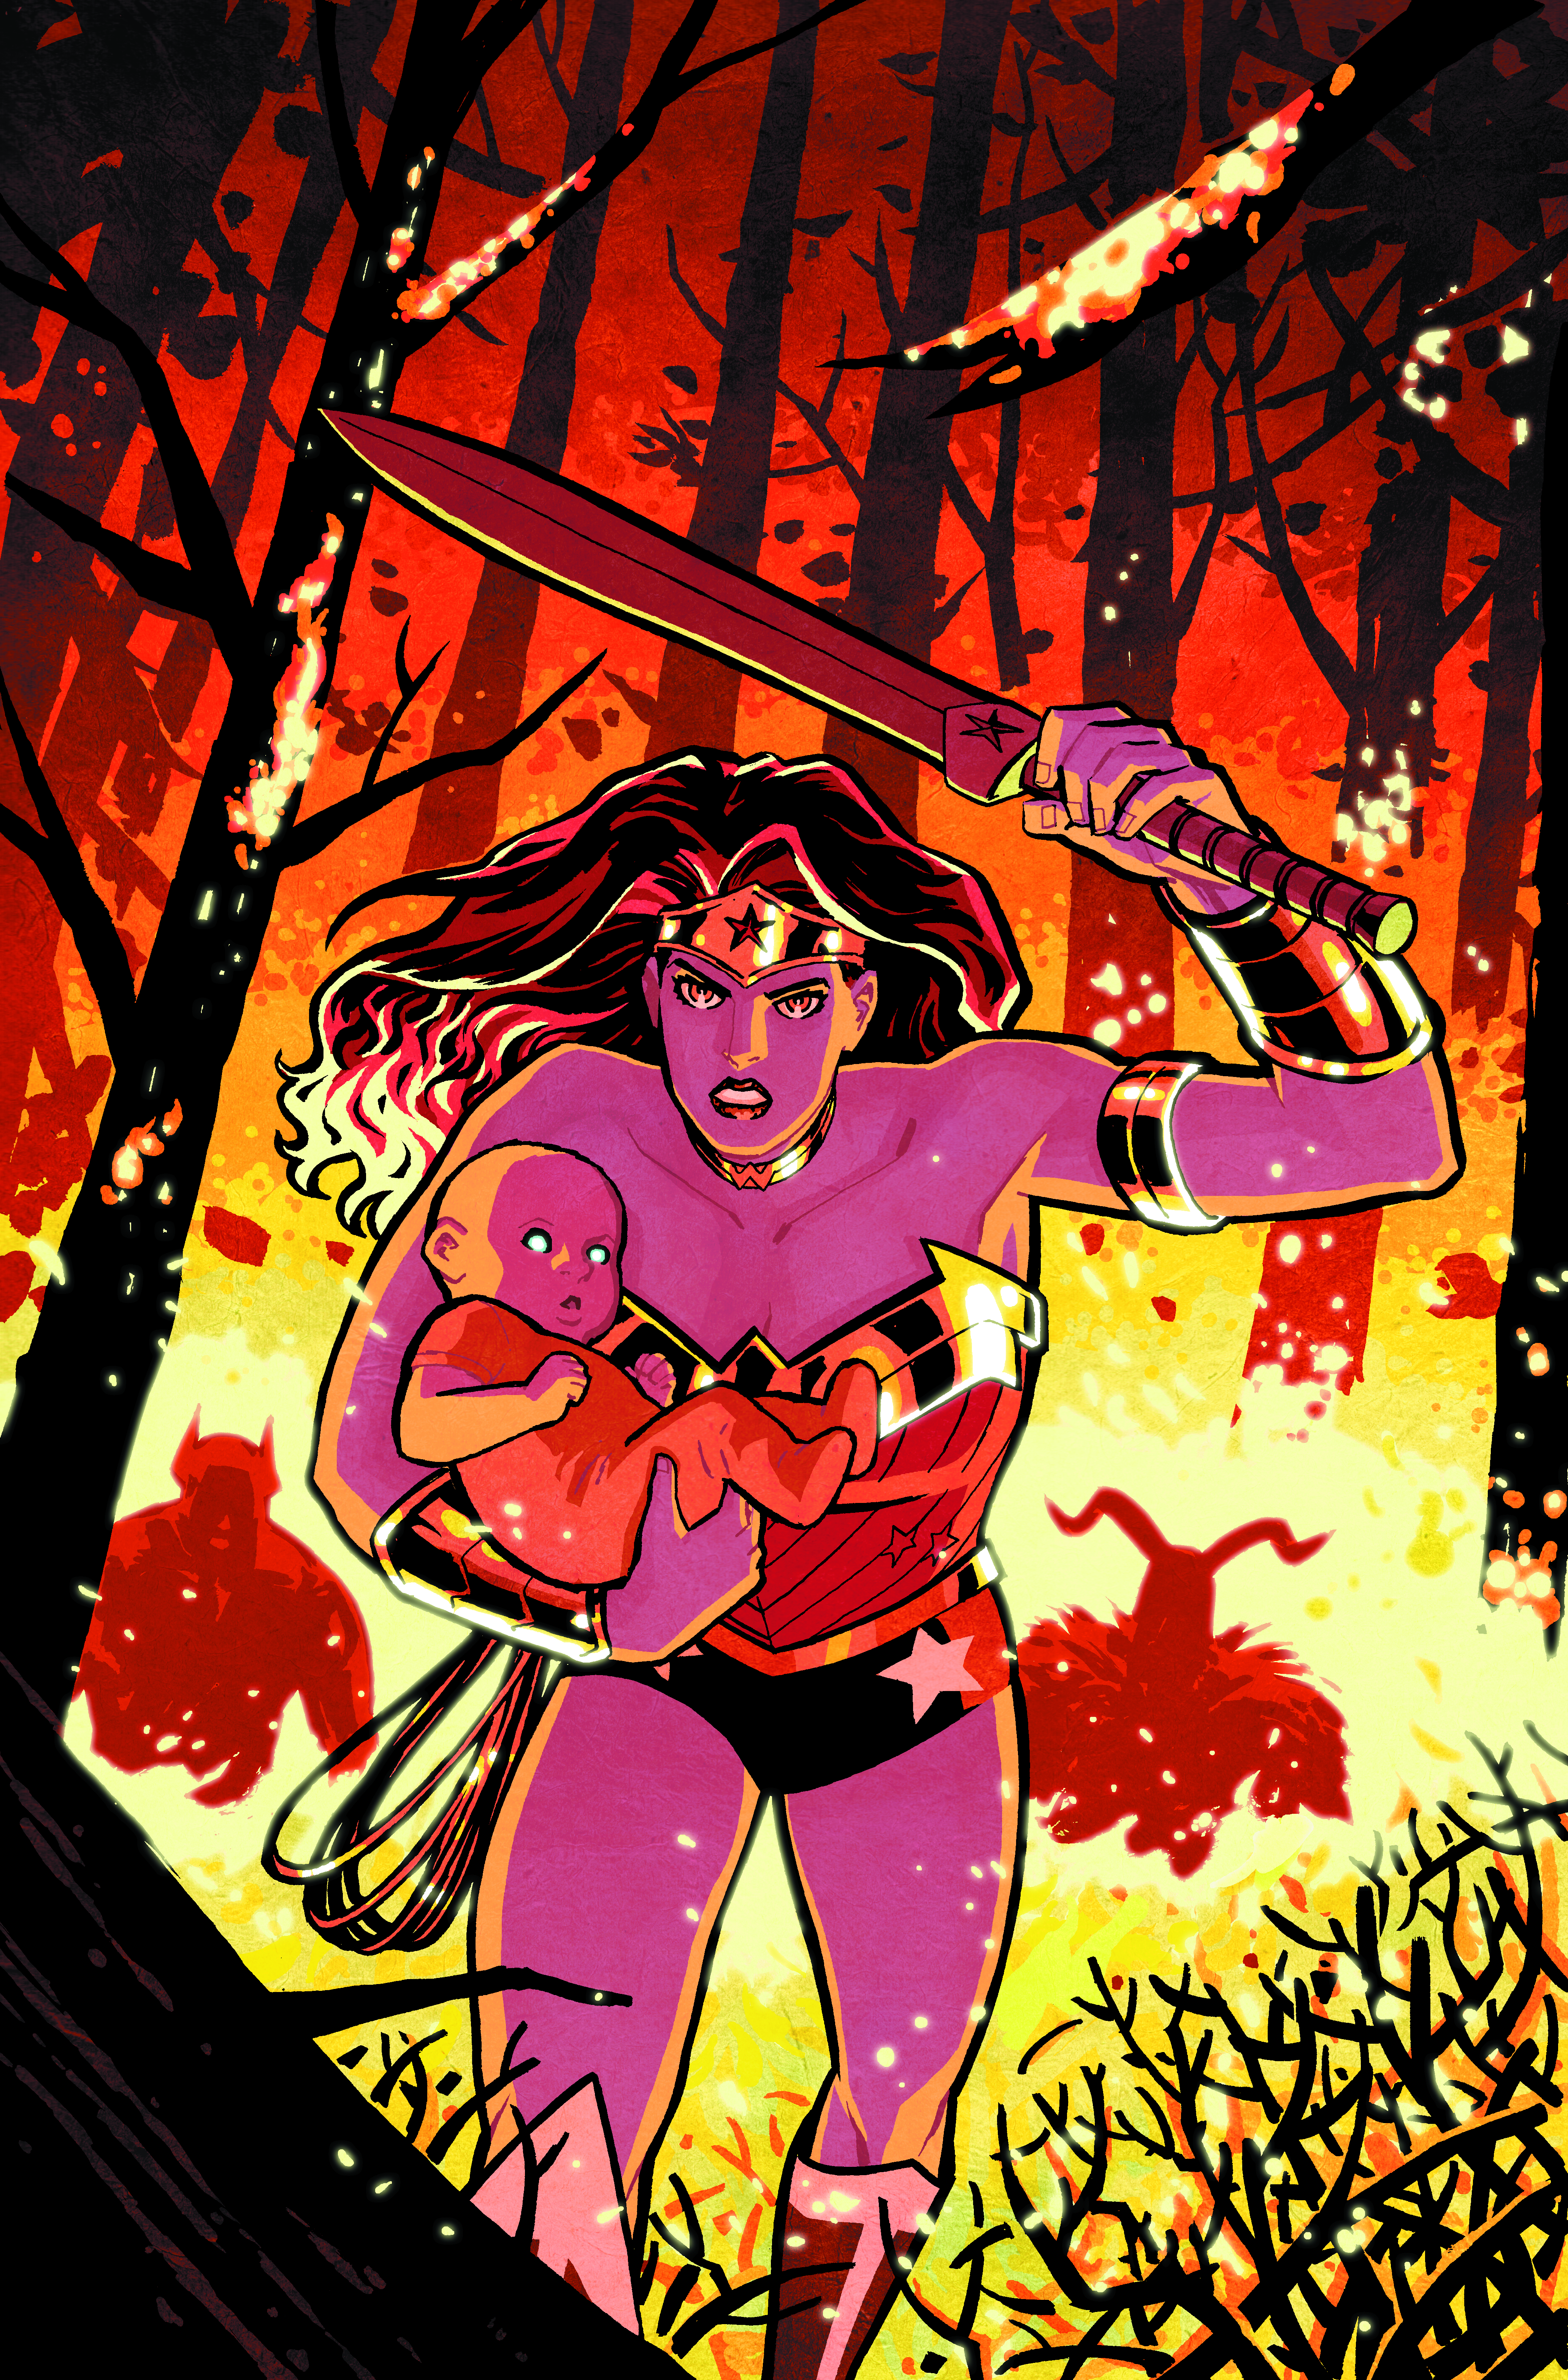 2013: Wonder Woman gets a new origin story in DC's New 52 storyline.